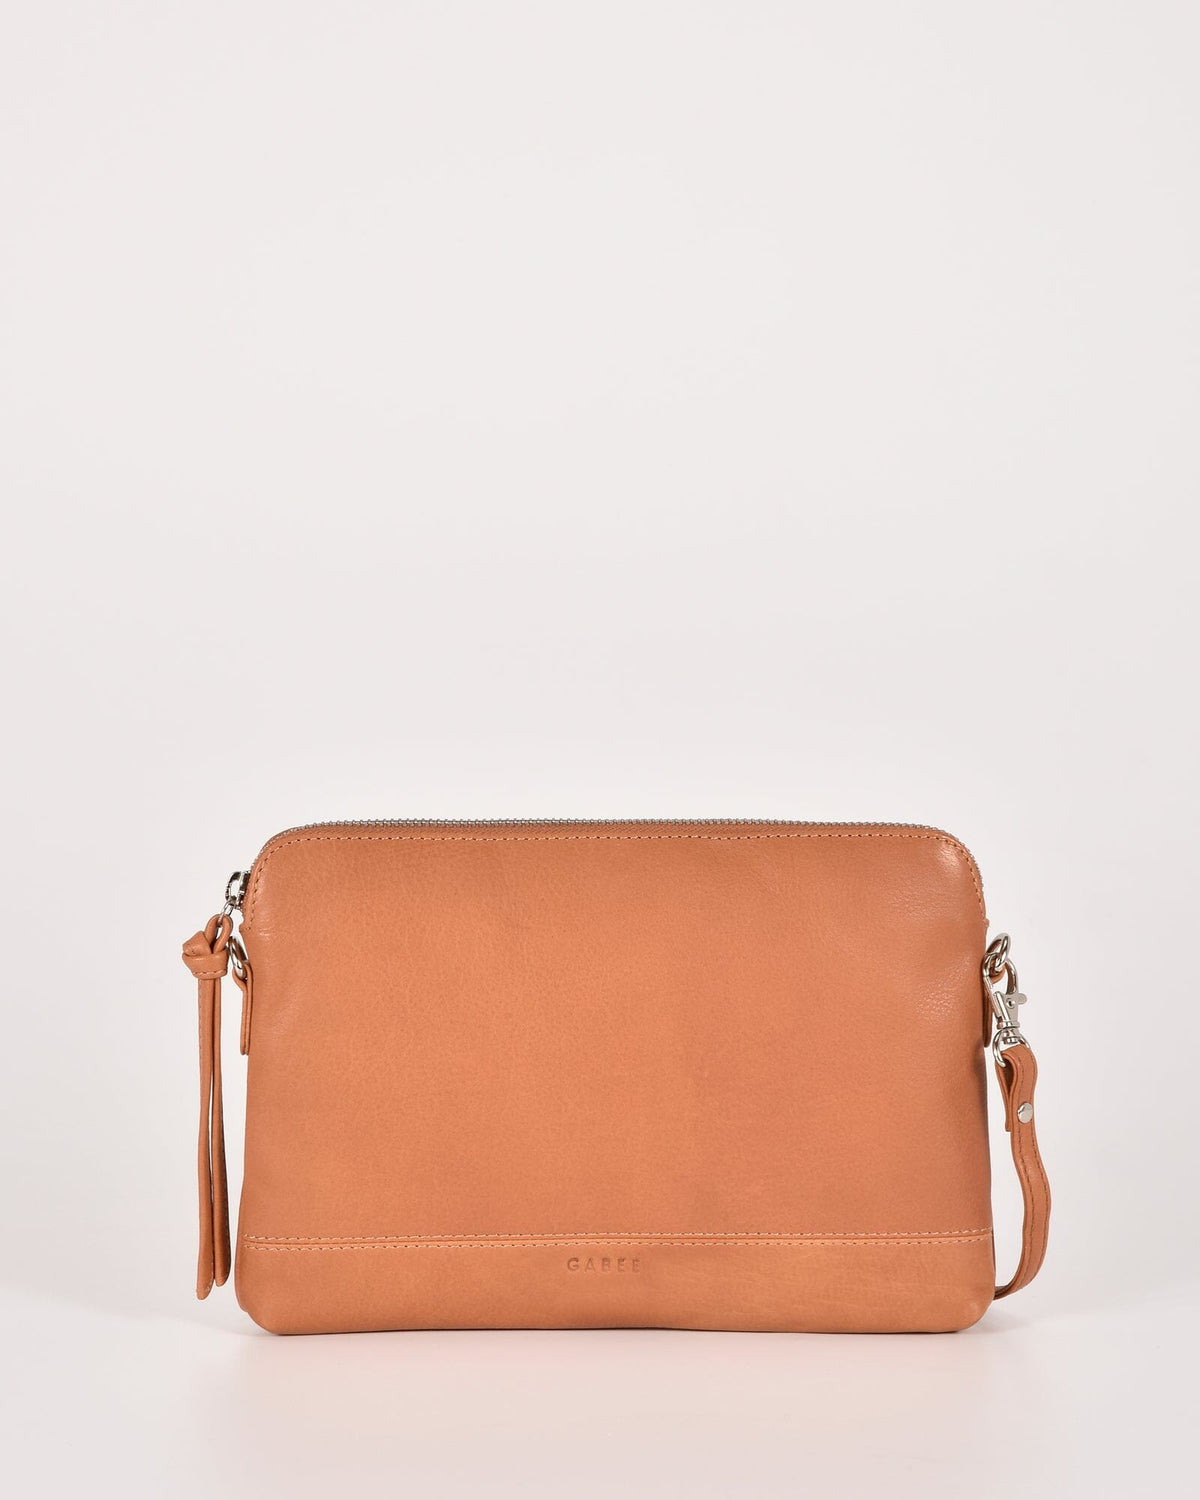 Holly Leather Crossbody Purse 2 in 1